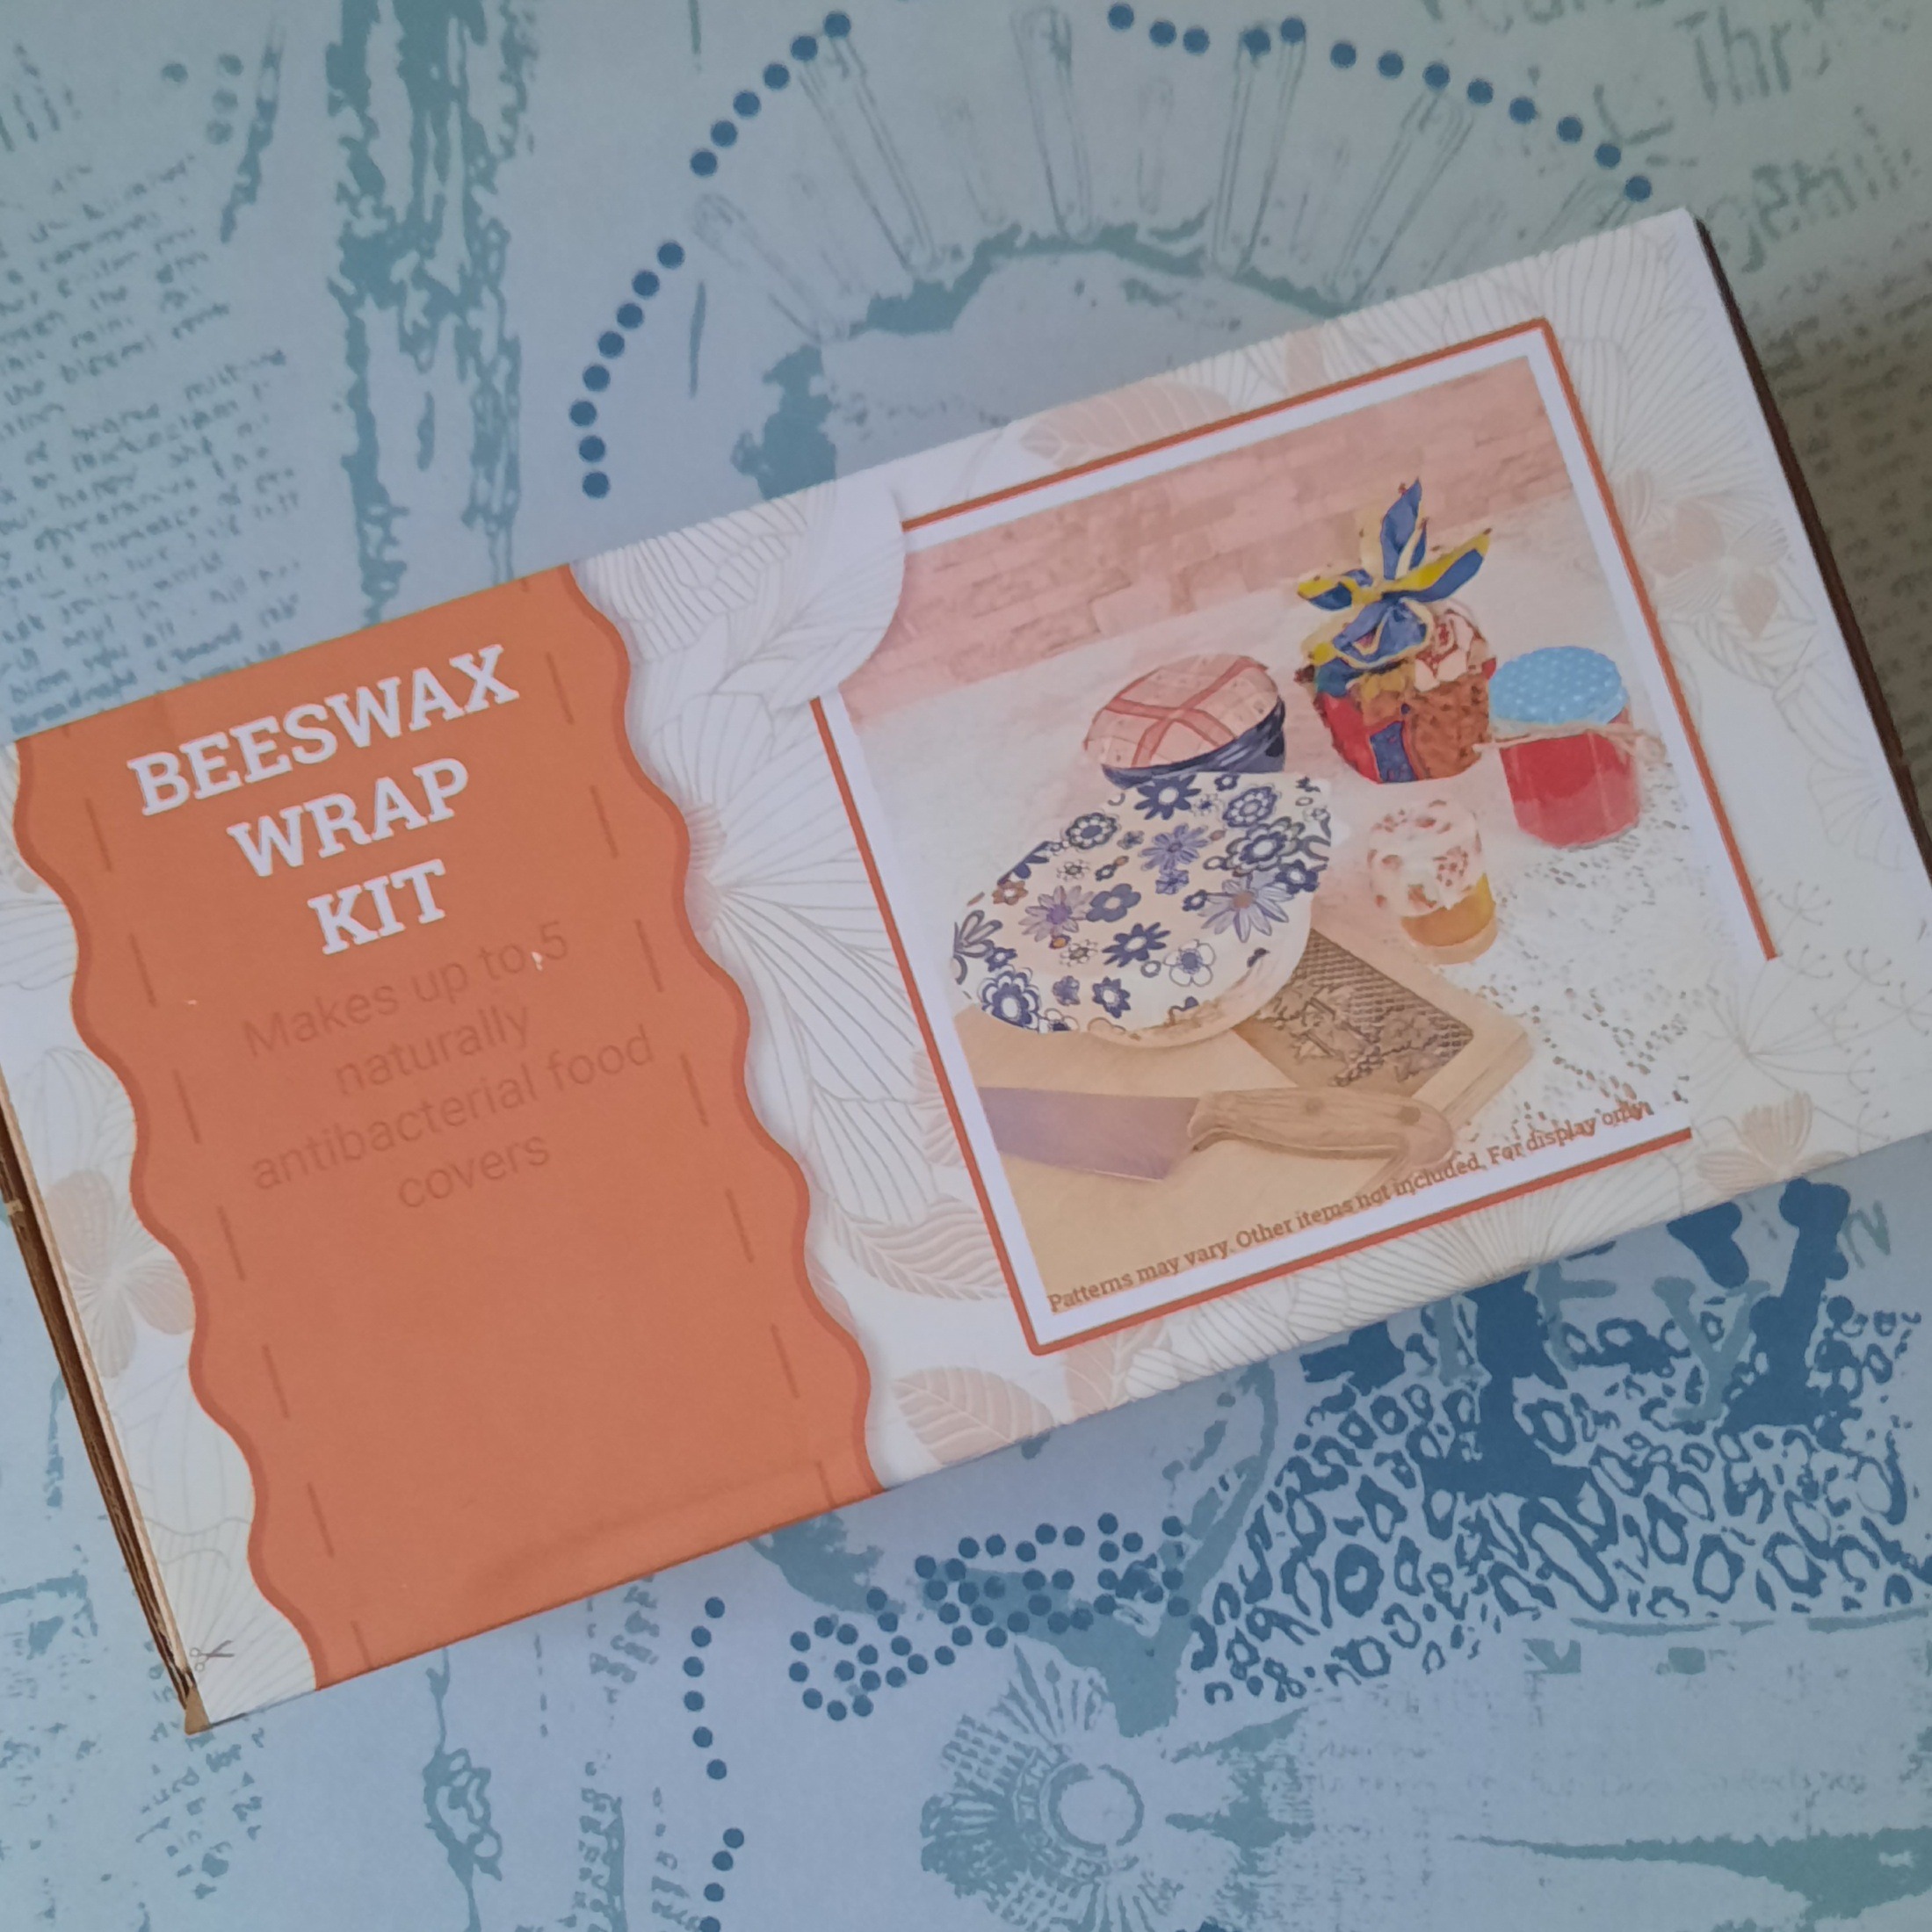 Beeswax Food Cover Kit